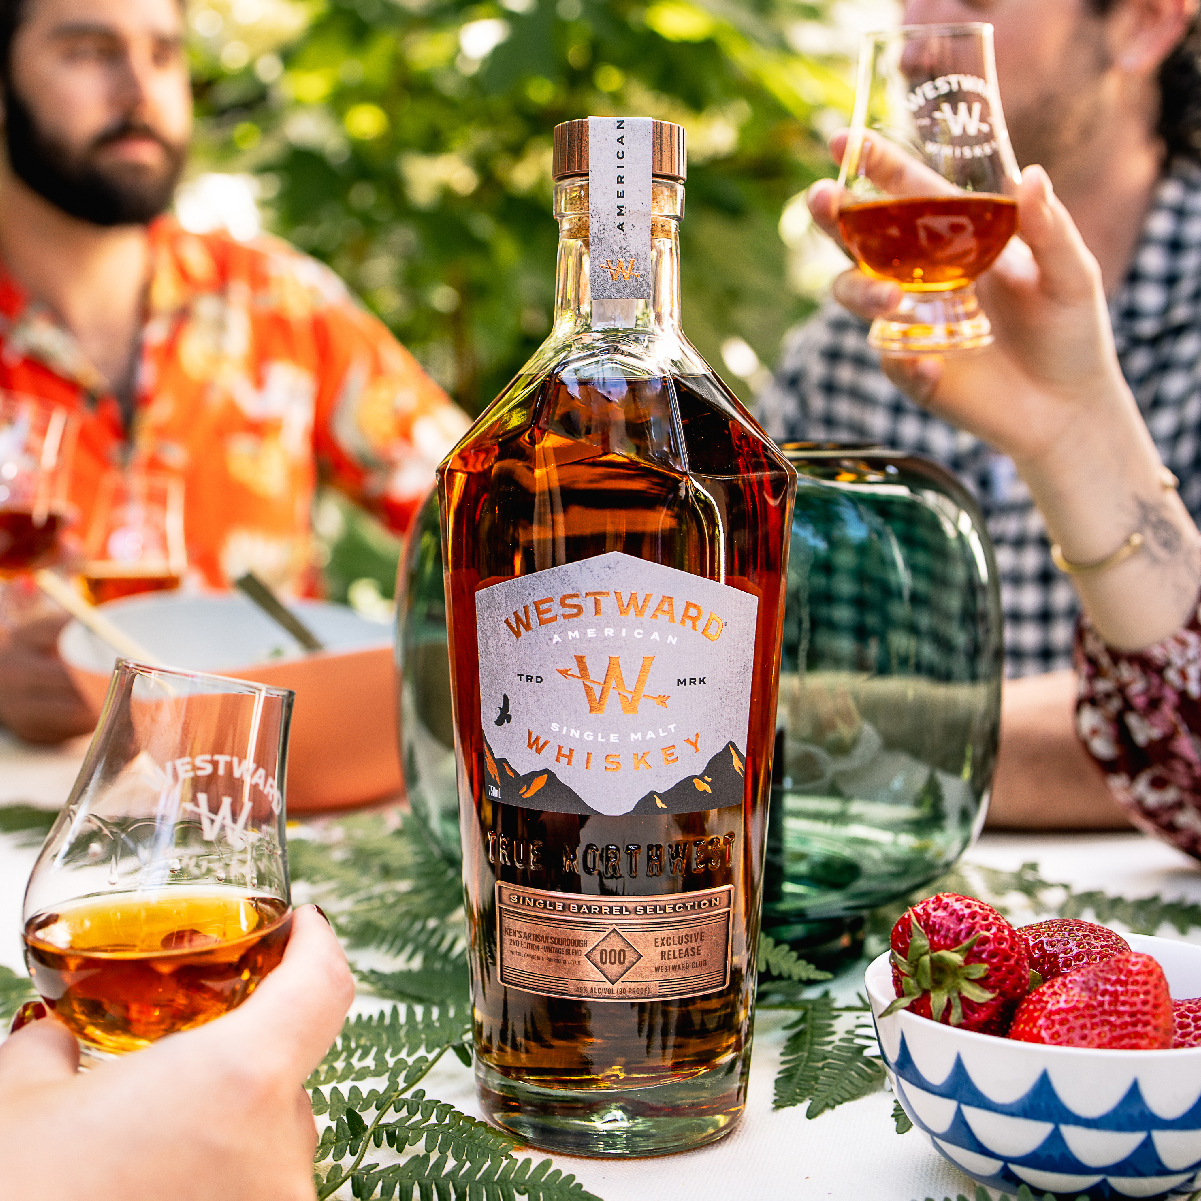 Westward Whiskey Announces Sourdough Release in Collaboration with James Beard Award Winner